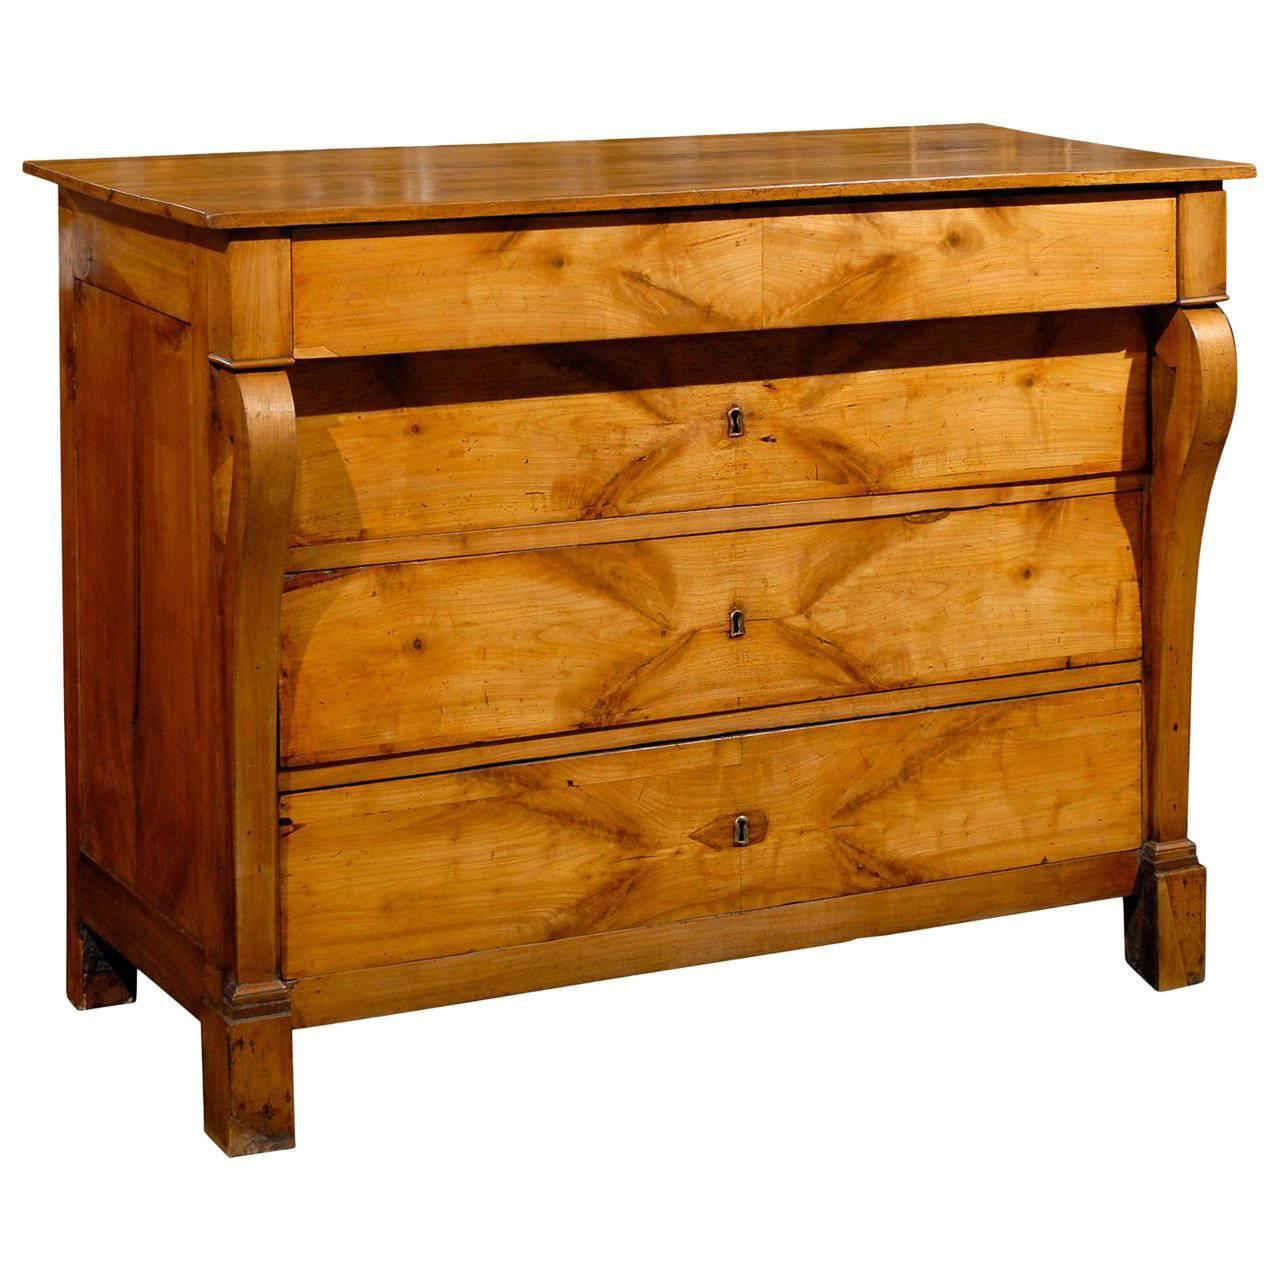 Early 19th Century, Empire Cherry Four-Drawer Commode with Volute Shaped Legs